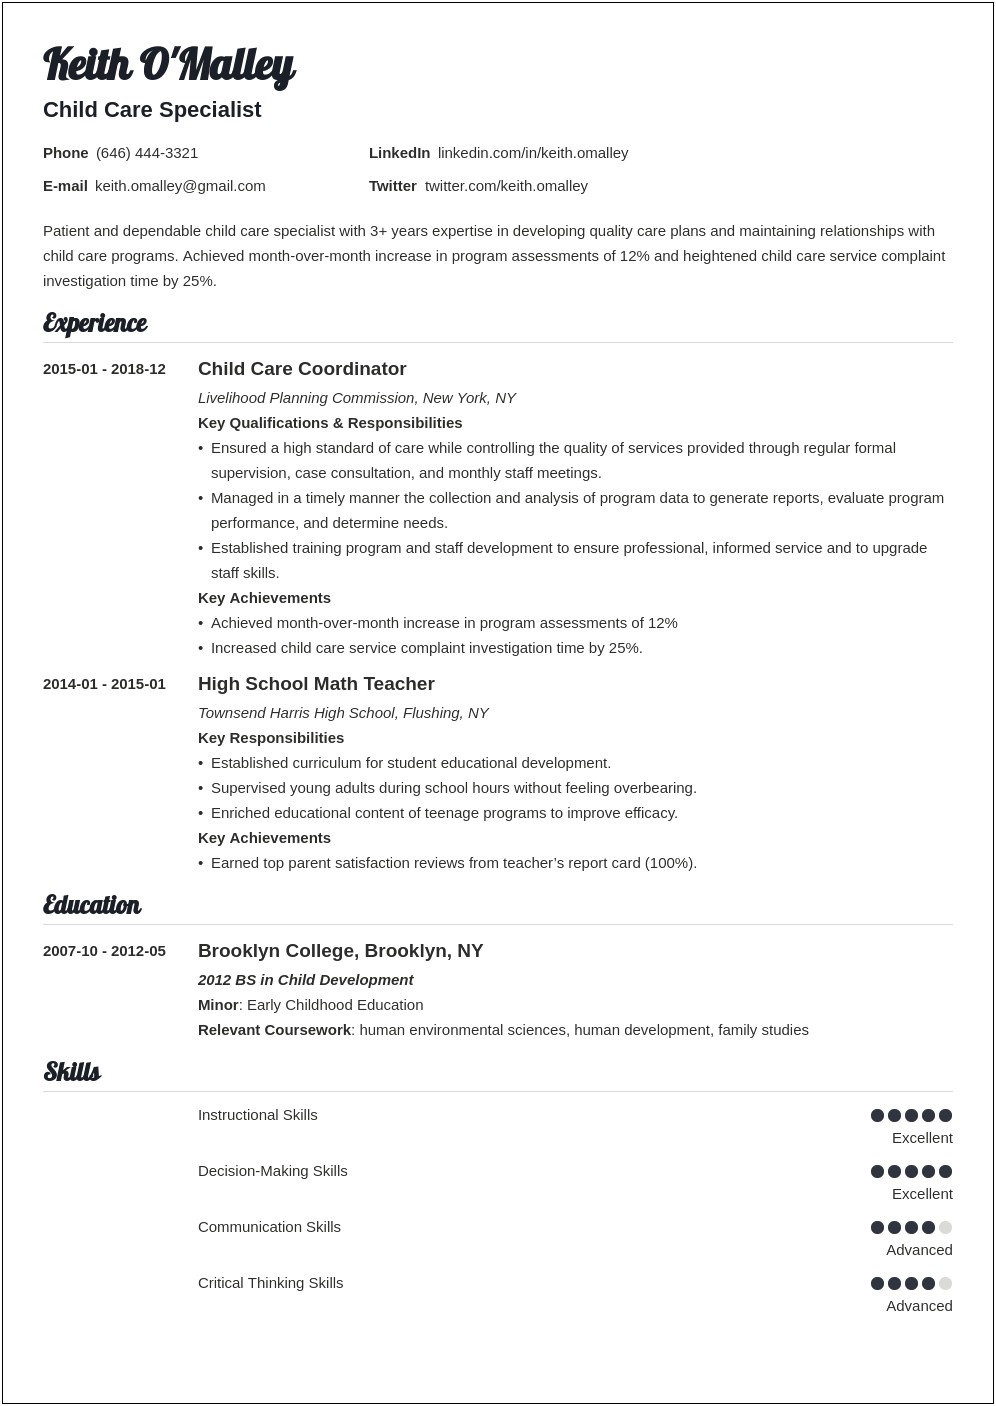 Child Care Worker Resume Professional Summary